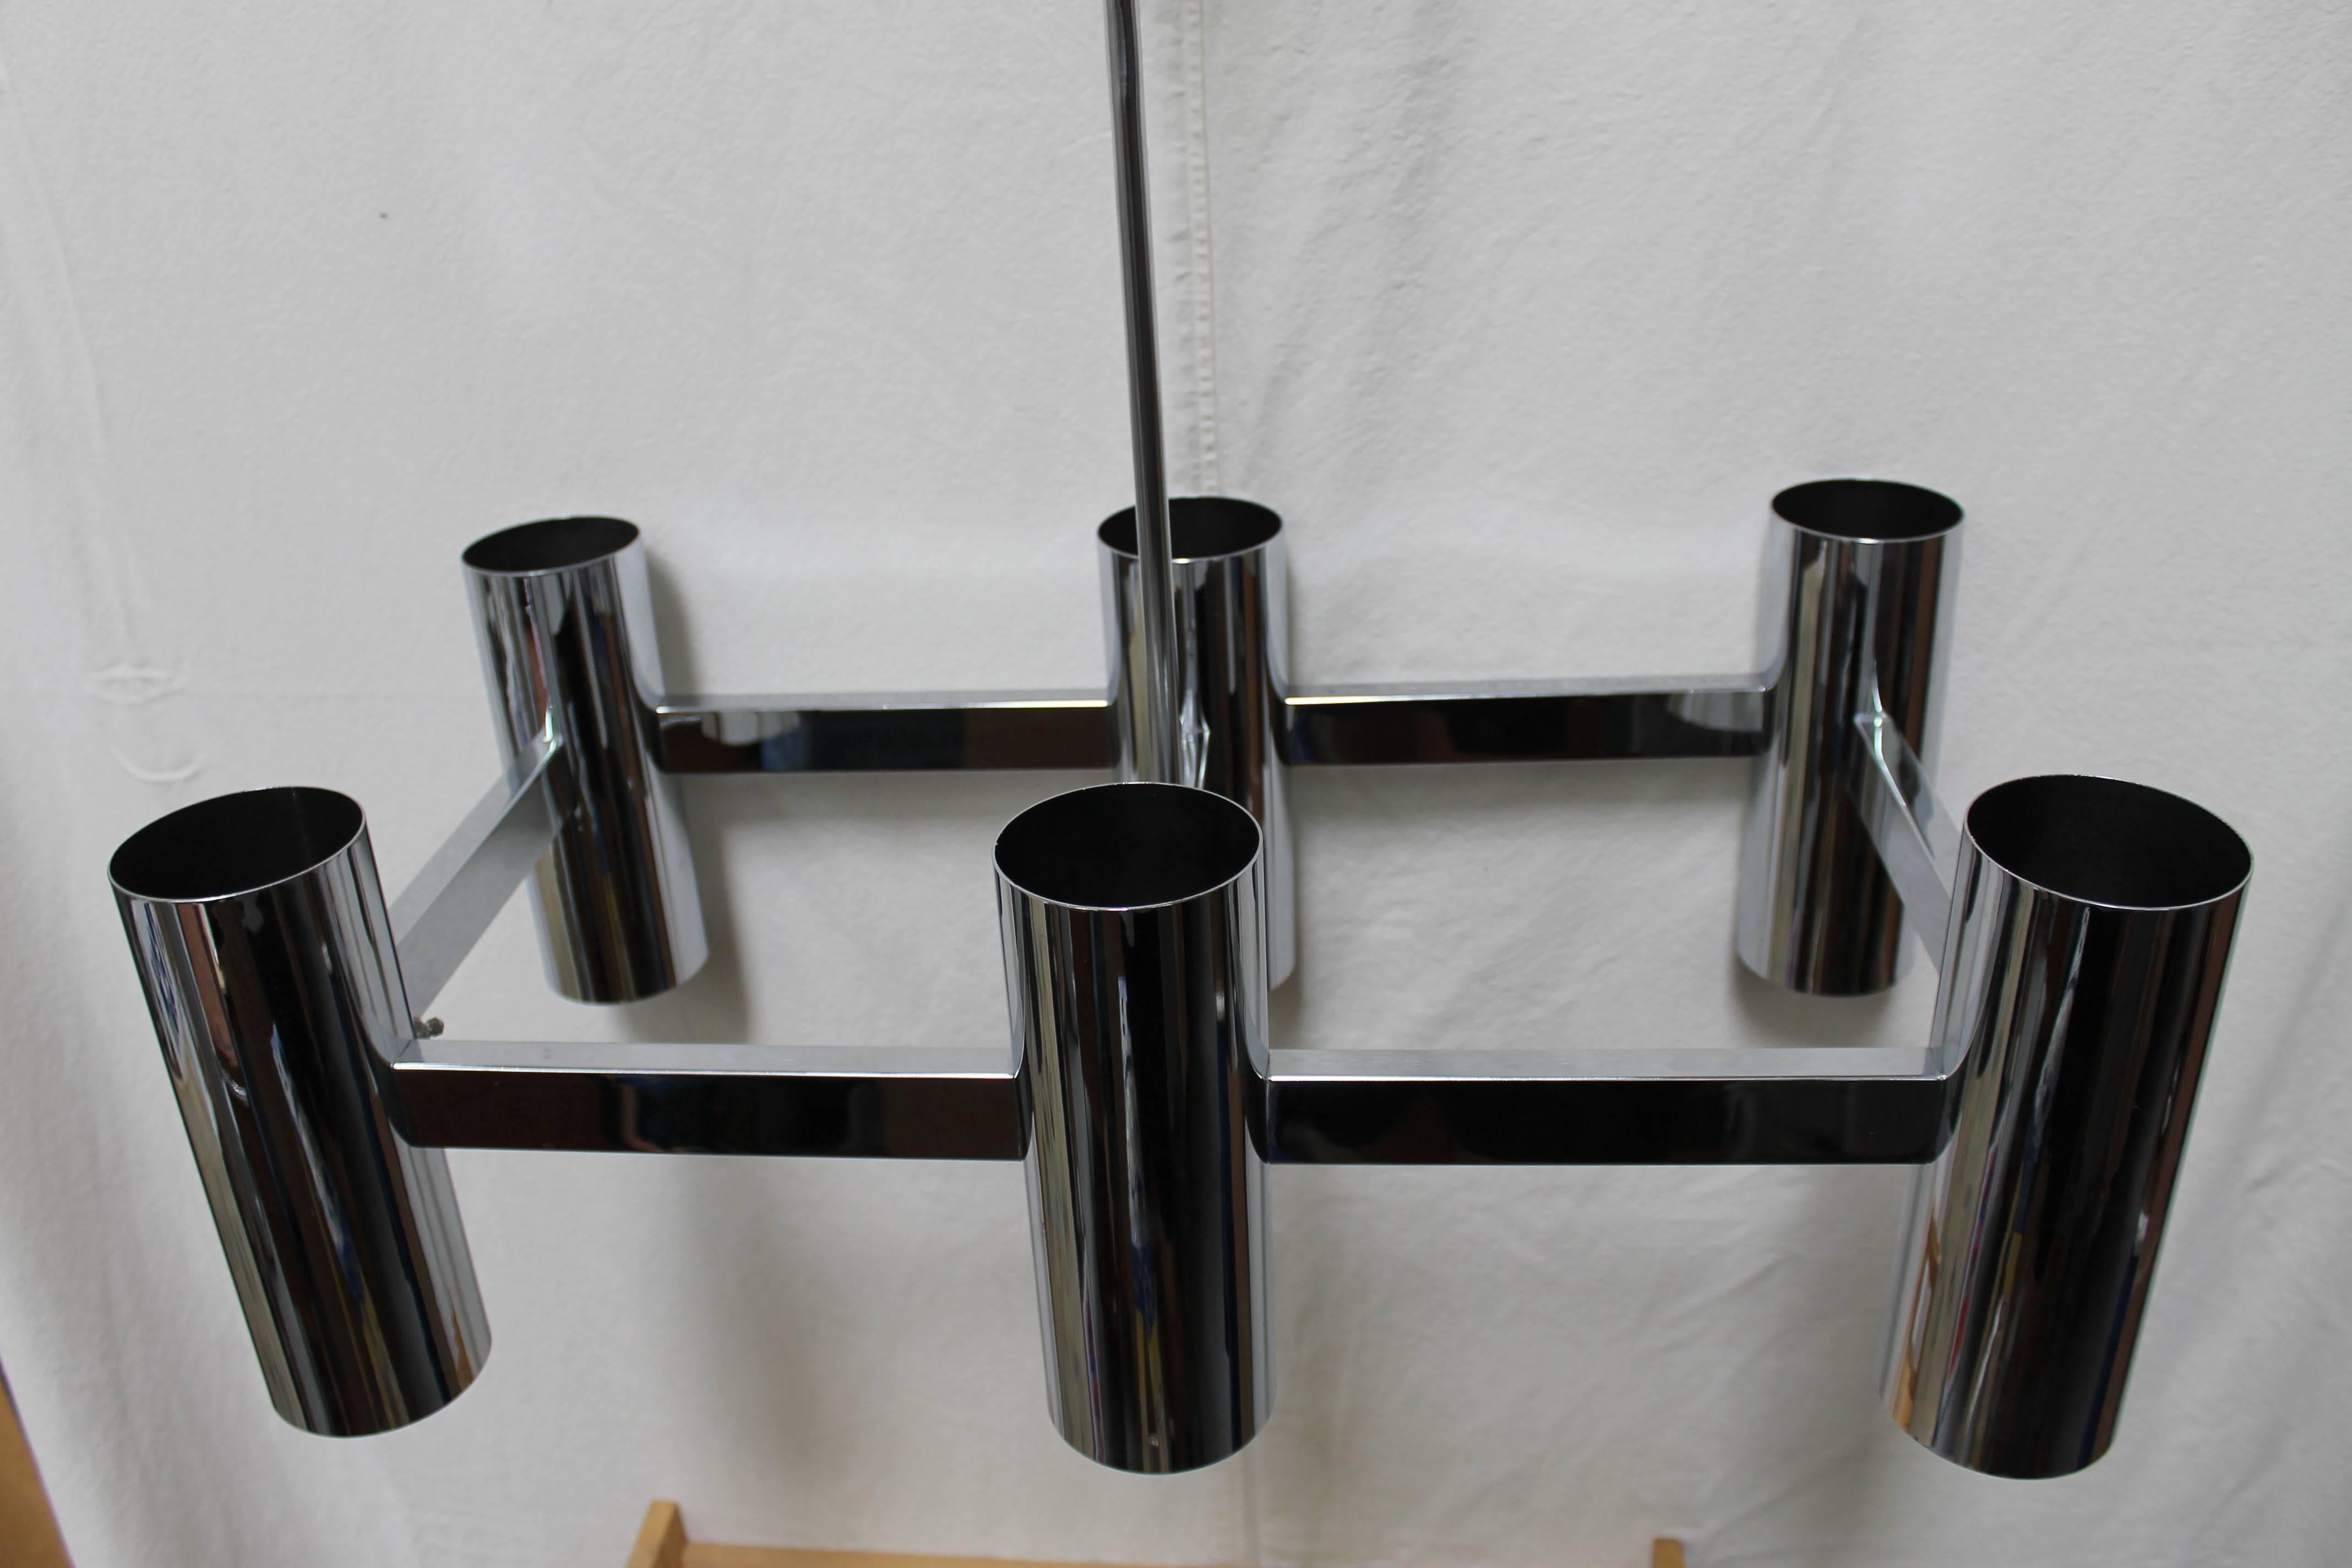 Chrome-plated steel chandelier consisting of six canisters. Three way switch enables you to light the bottom, light the top or both top and bottom. Reminiscent of Laurel or Robert Sonneman Lighting fixtures. Fixture has been professionally rewired.